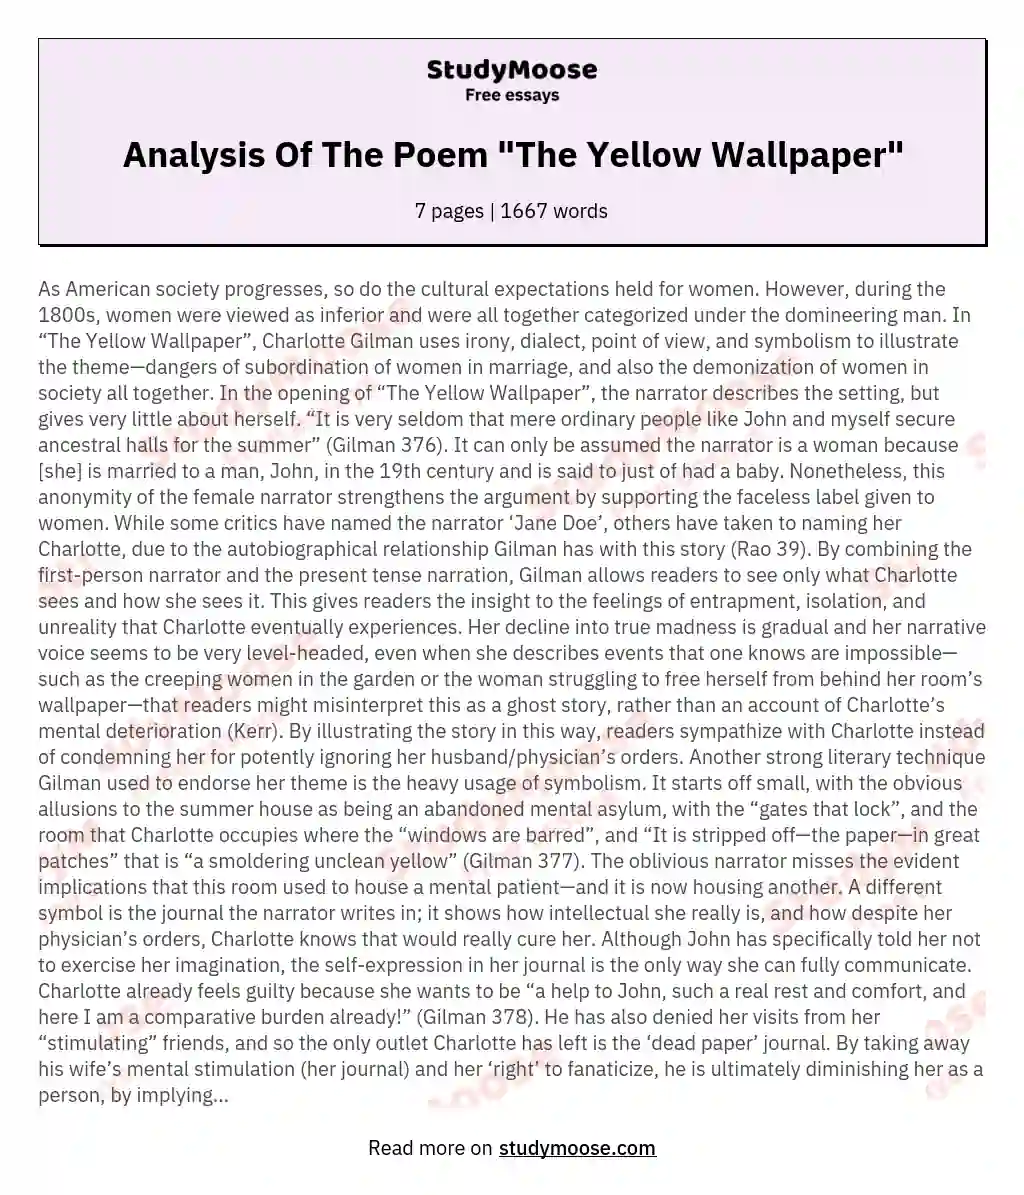 Analysis Of The Poem "The Yellow Wallpaper" essay